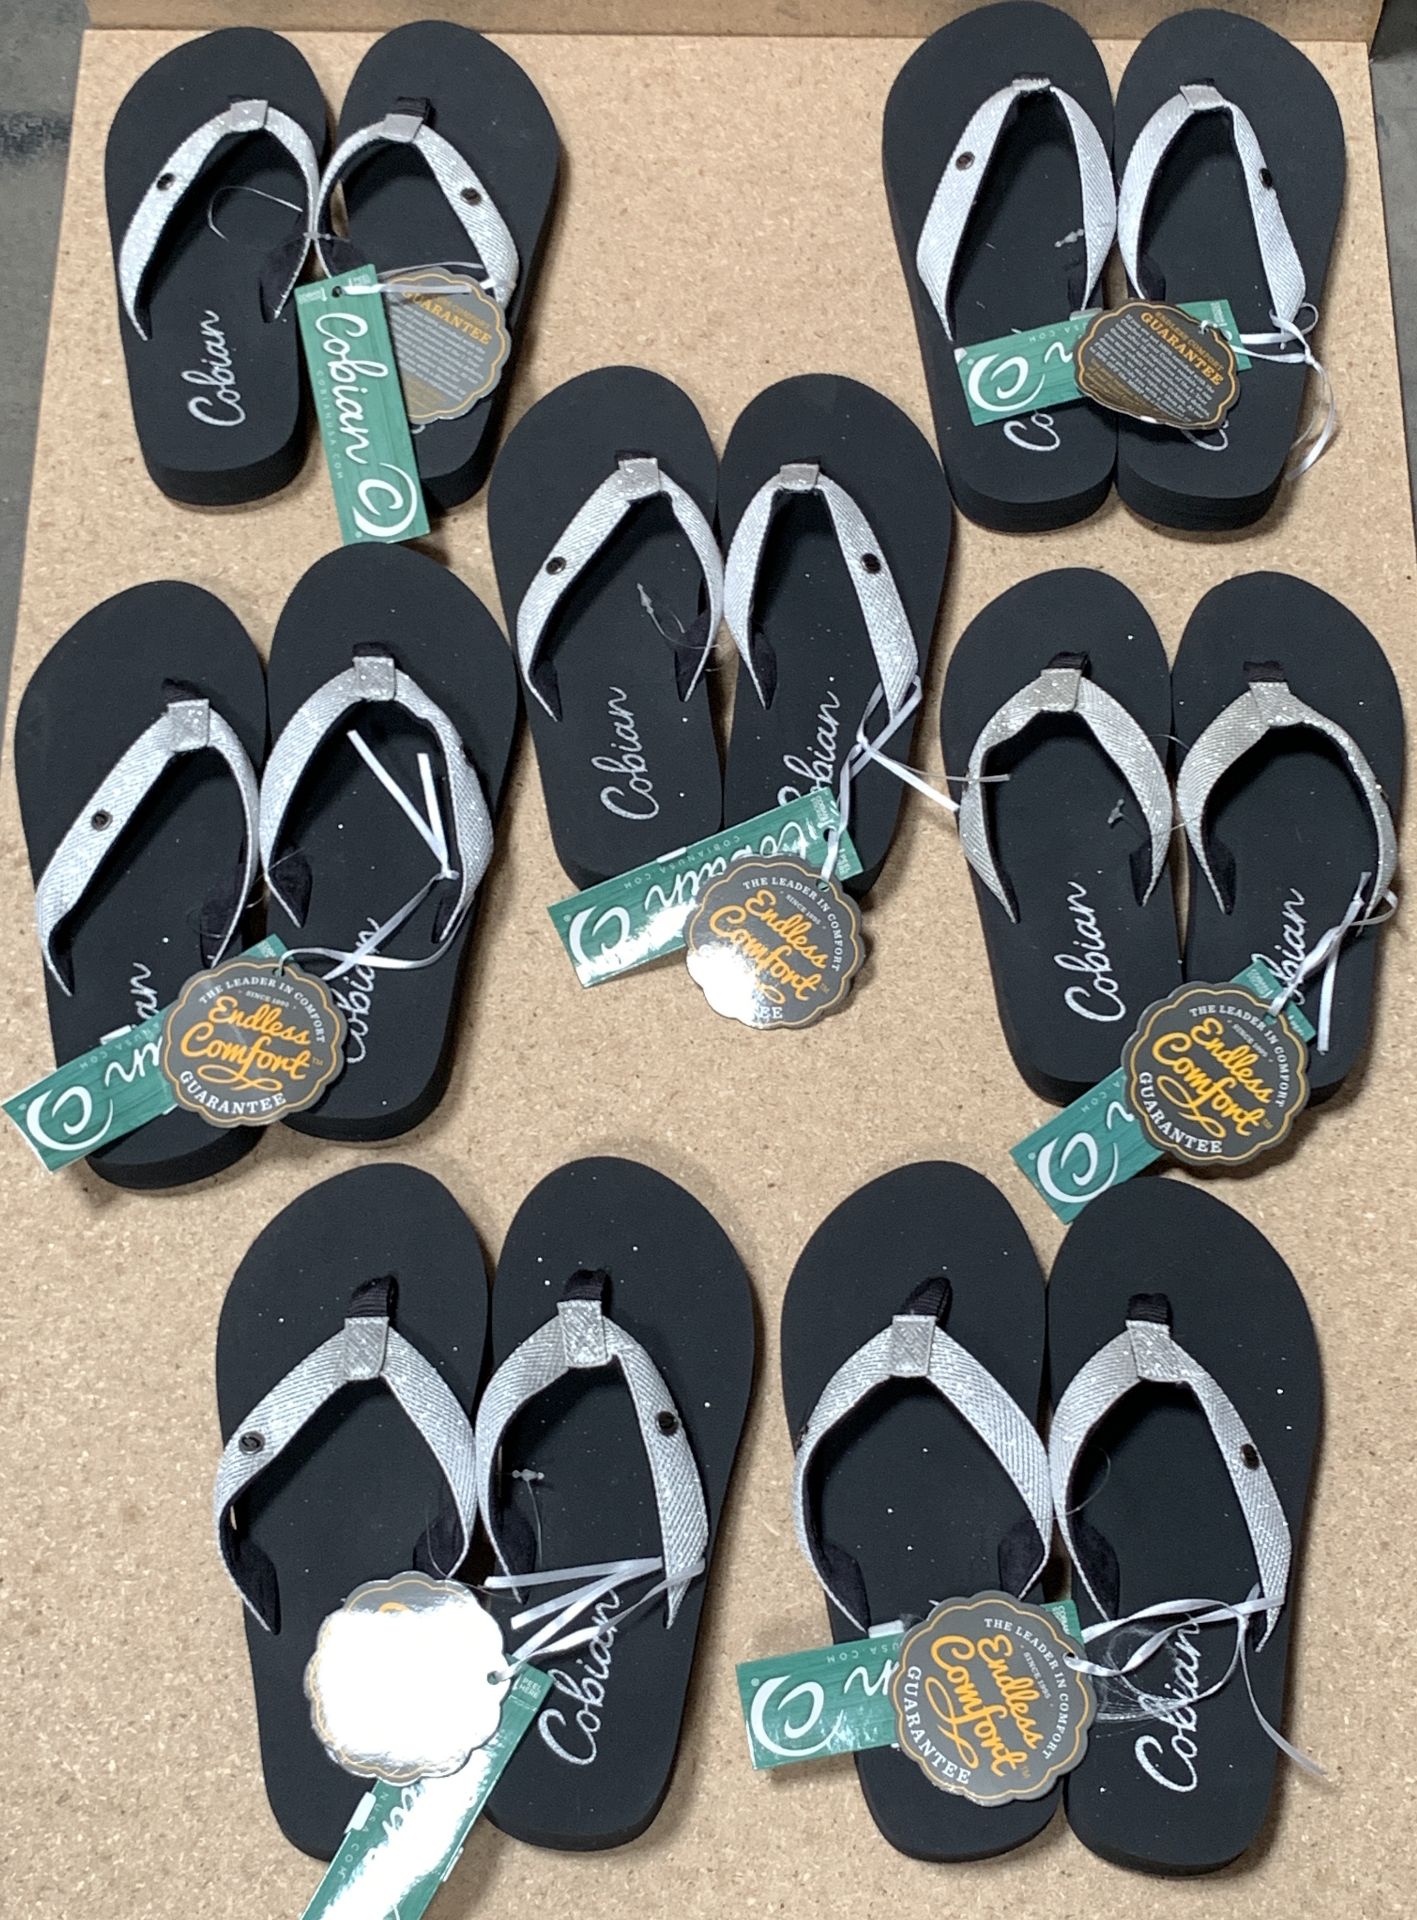 7 Pairs Cobian Flip Flop Sandals, Cancun Bounce, New w. Tags, Various Sizes (Retail $266) - Image 2 of 4